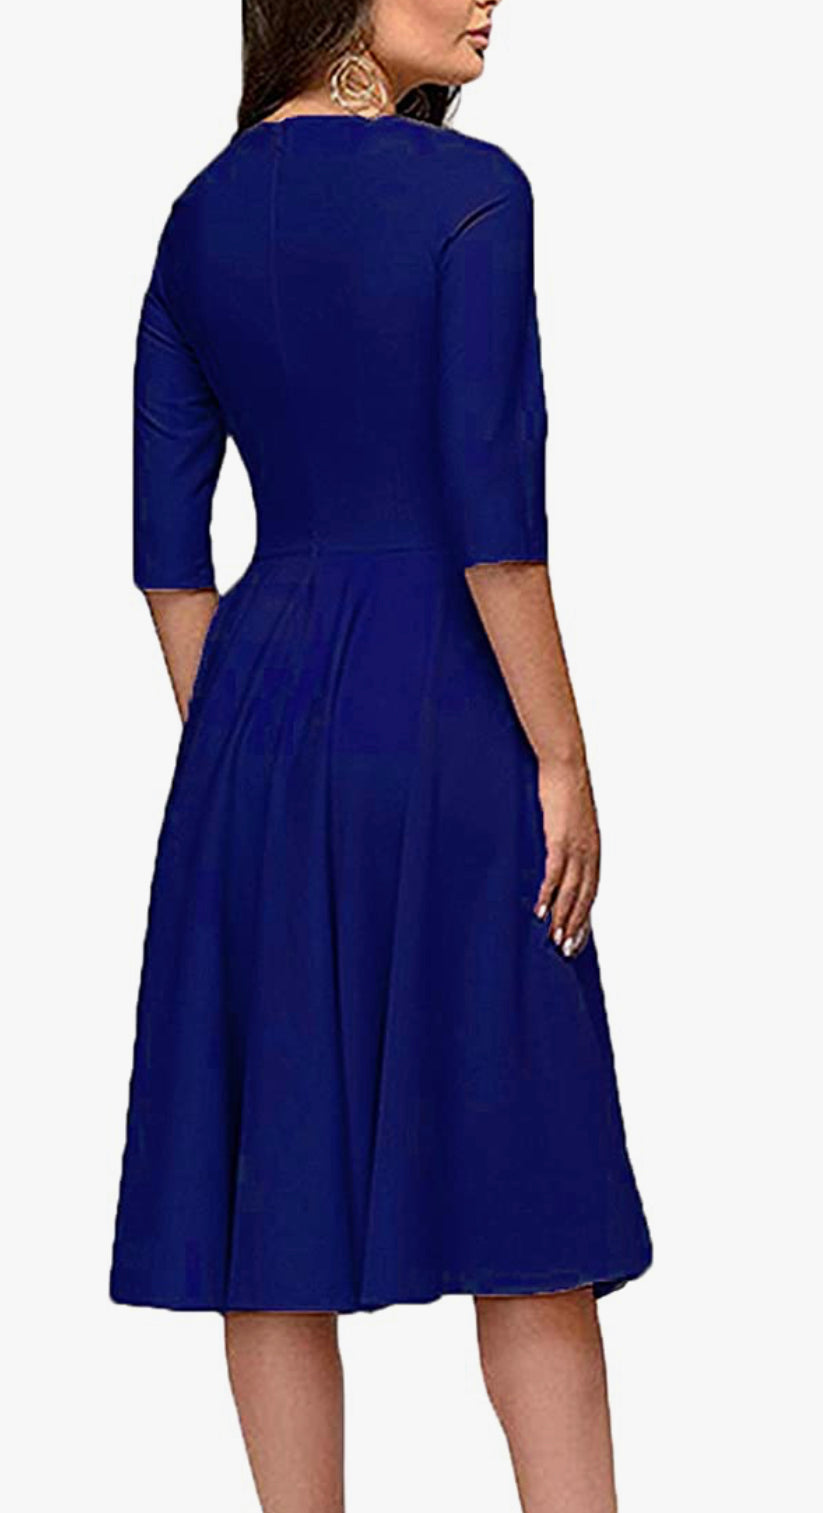 Elegant Audrey Hepburn Style Ruched 3/4 Sleeve Casual Swing A-line Dress (Royal Blue)